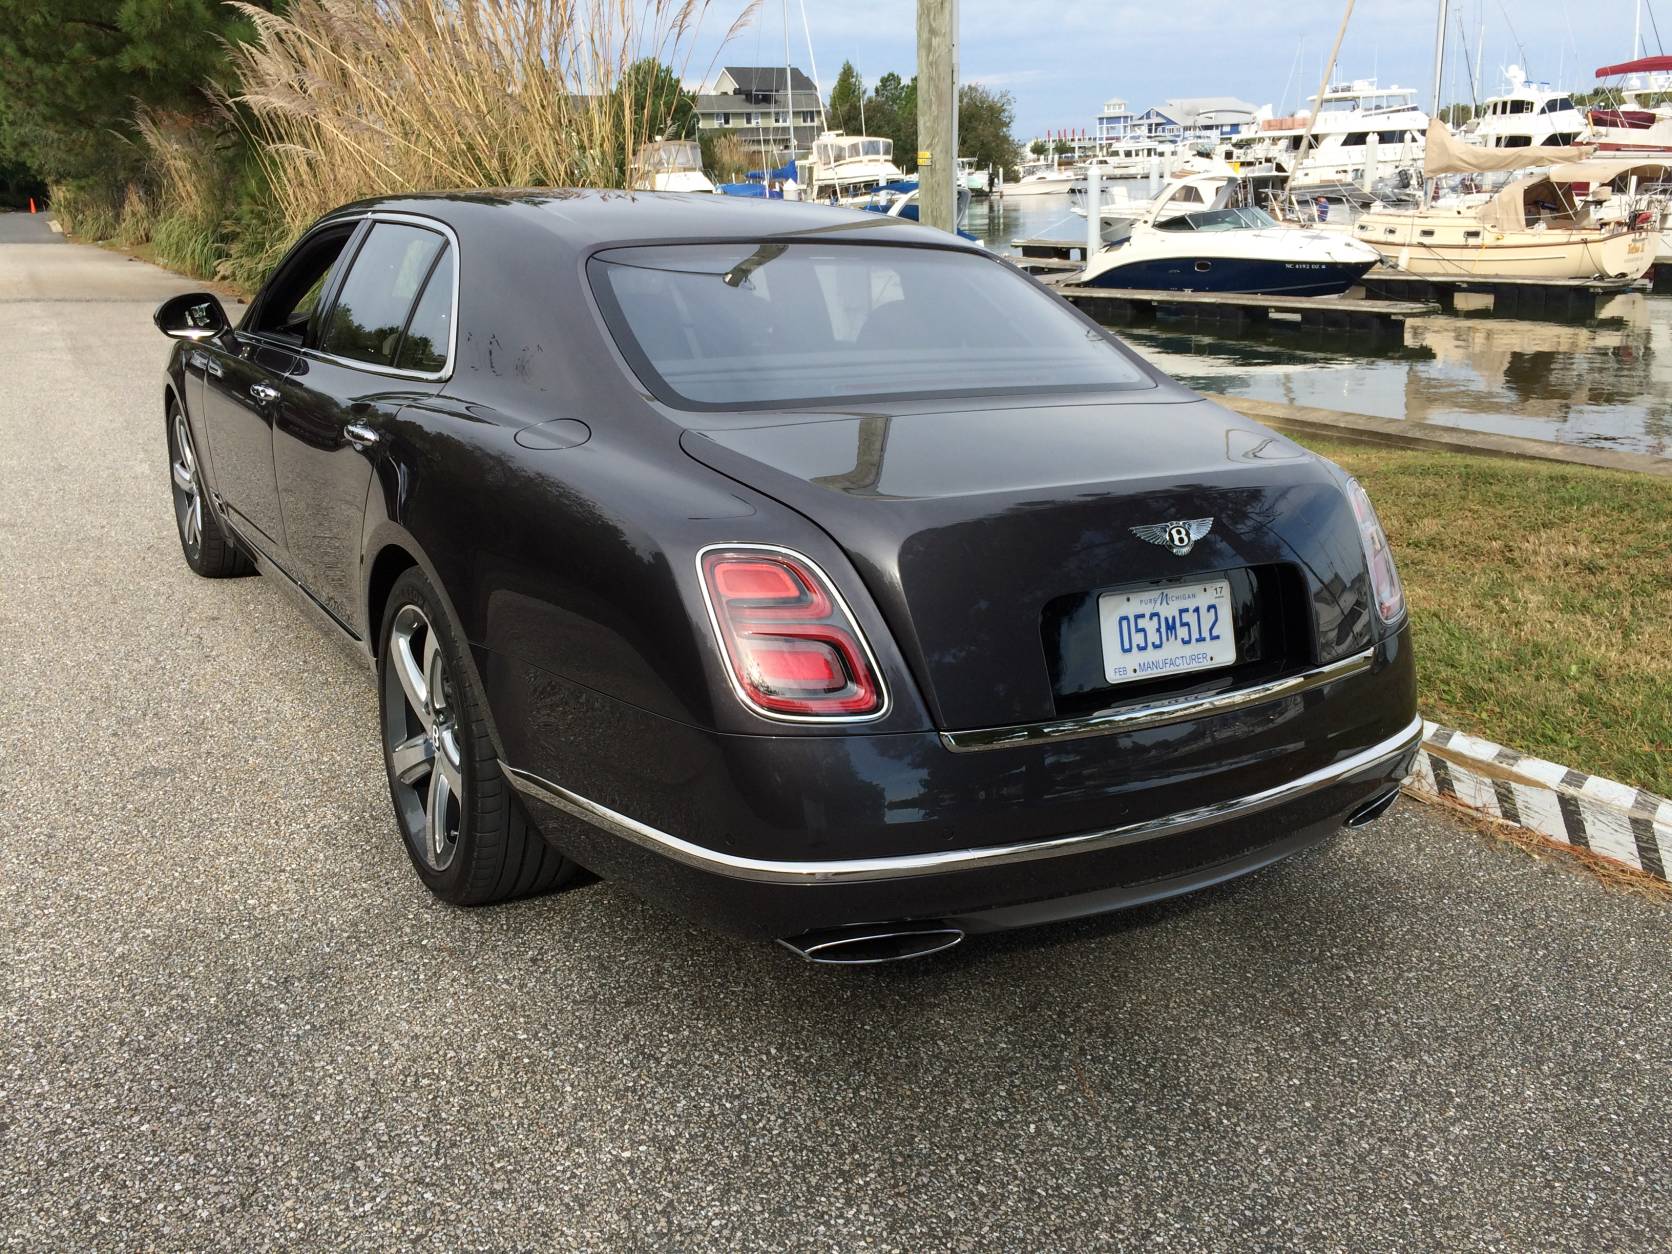 There are large 21-inch wheels with the Speed version of the Bentley Mulsanne and the flawless Magnetic paint color adds a bit of understated luxury to this pricey ride.  (WTOP/Mike Parris)